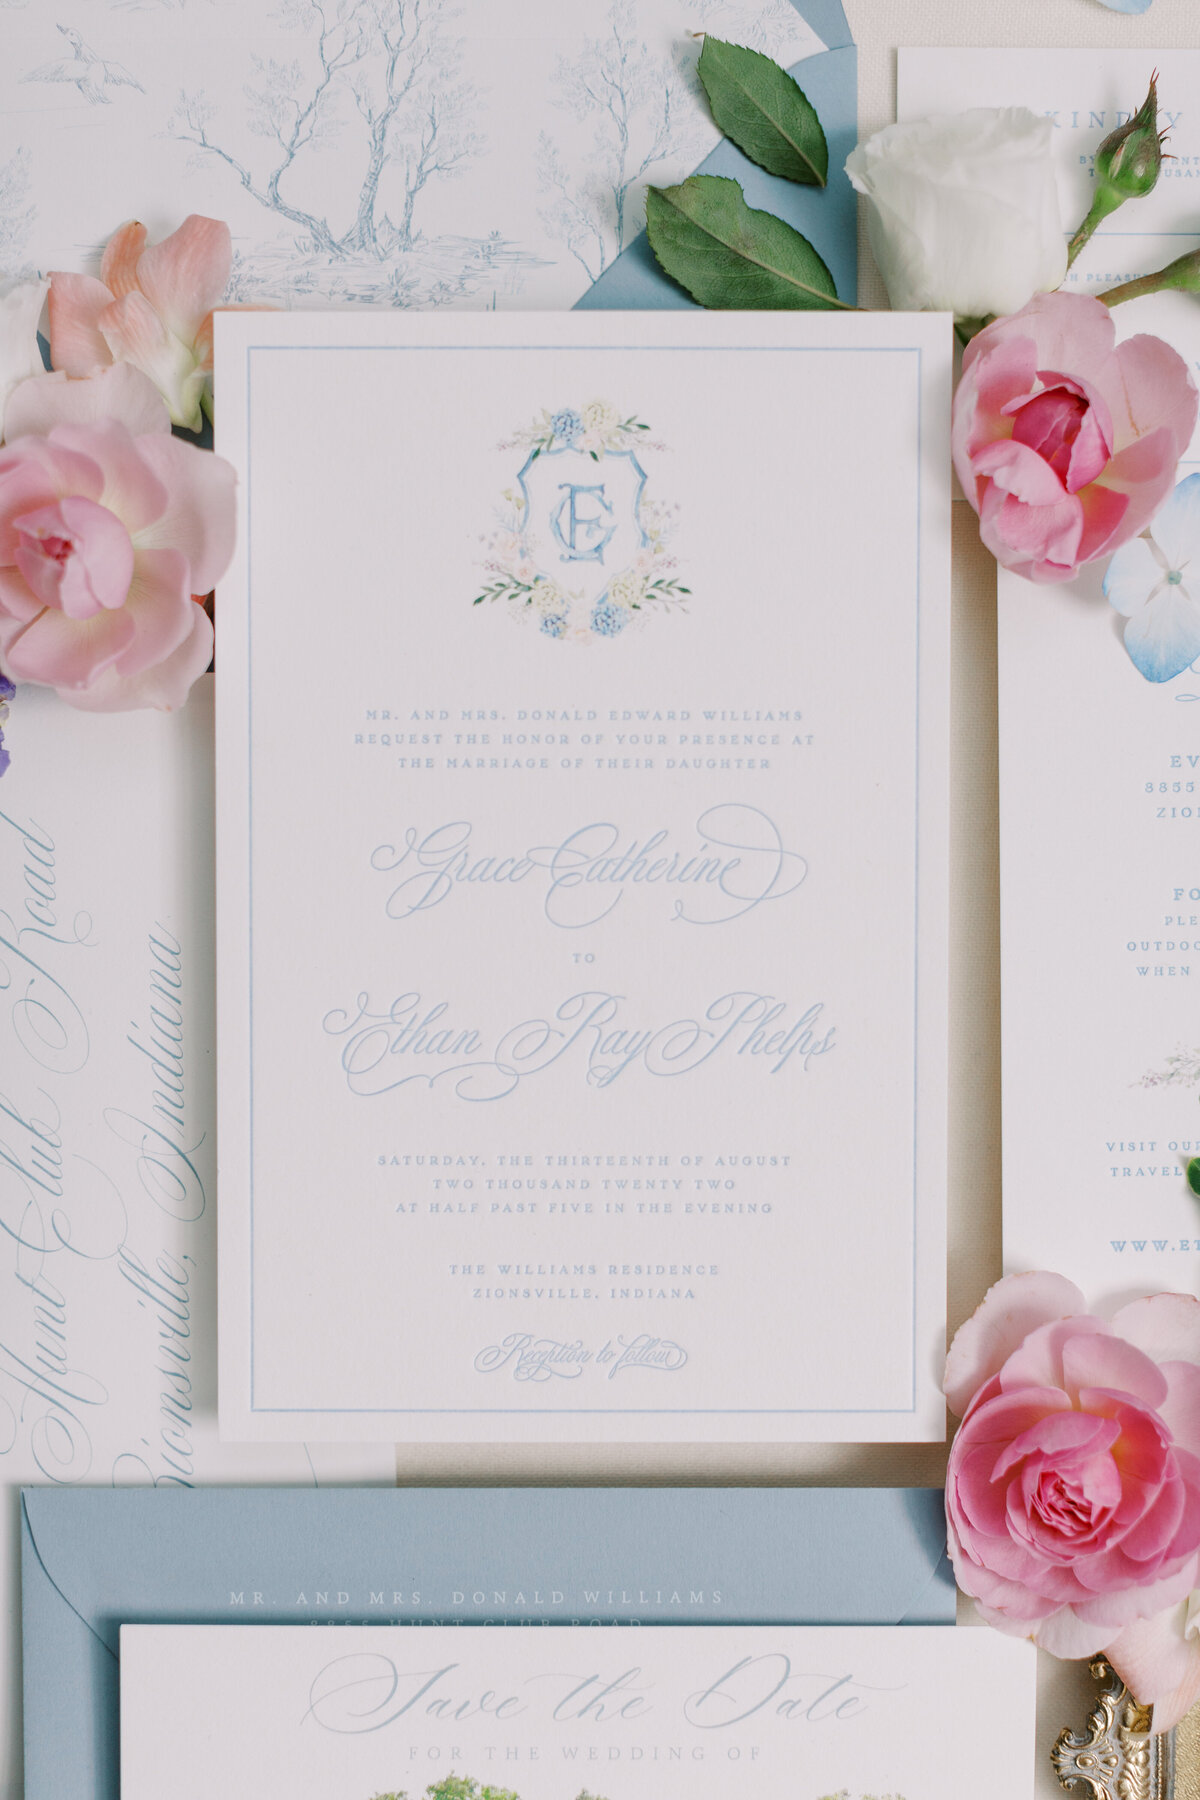 Beautiful blue themed wedding invitations with a wedding crest